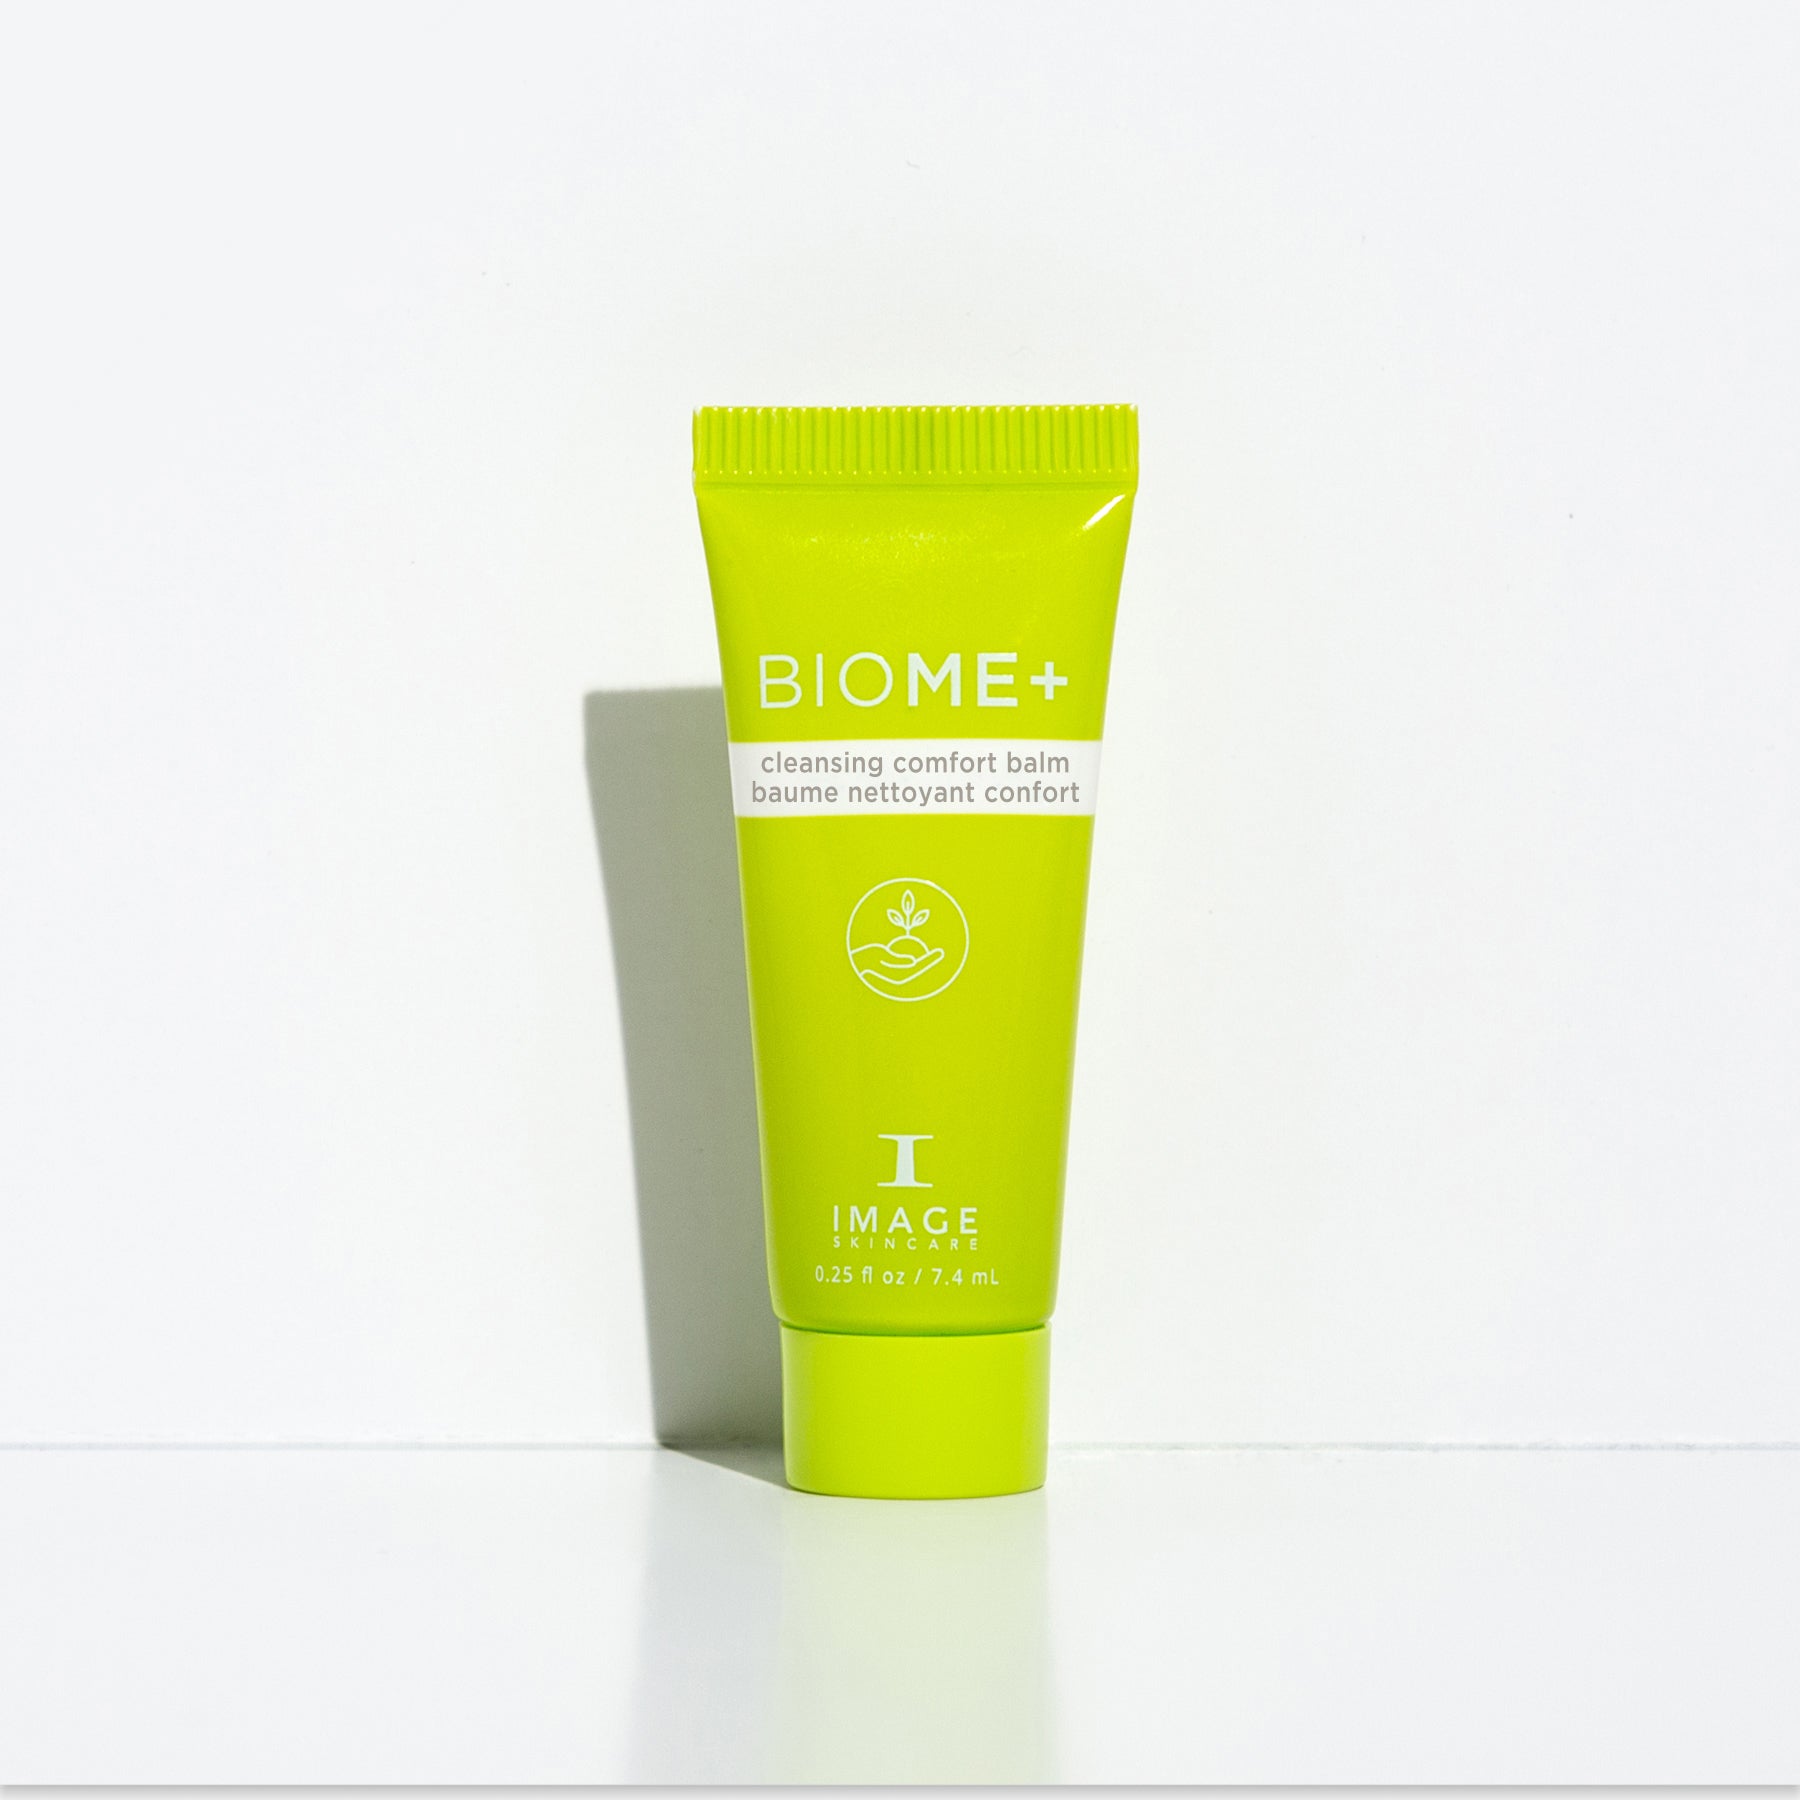 BIOME+ cleansing comfort balm sample